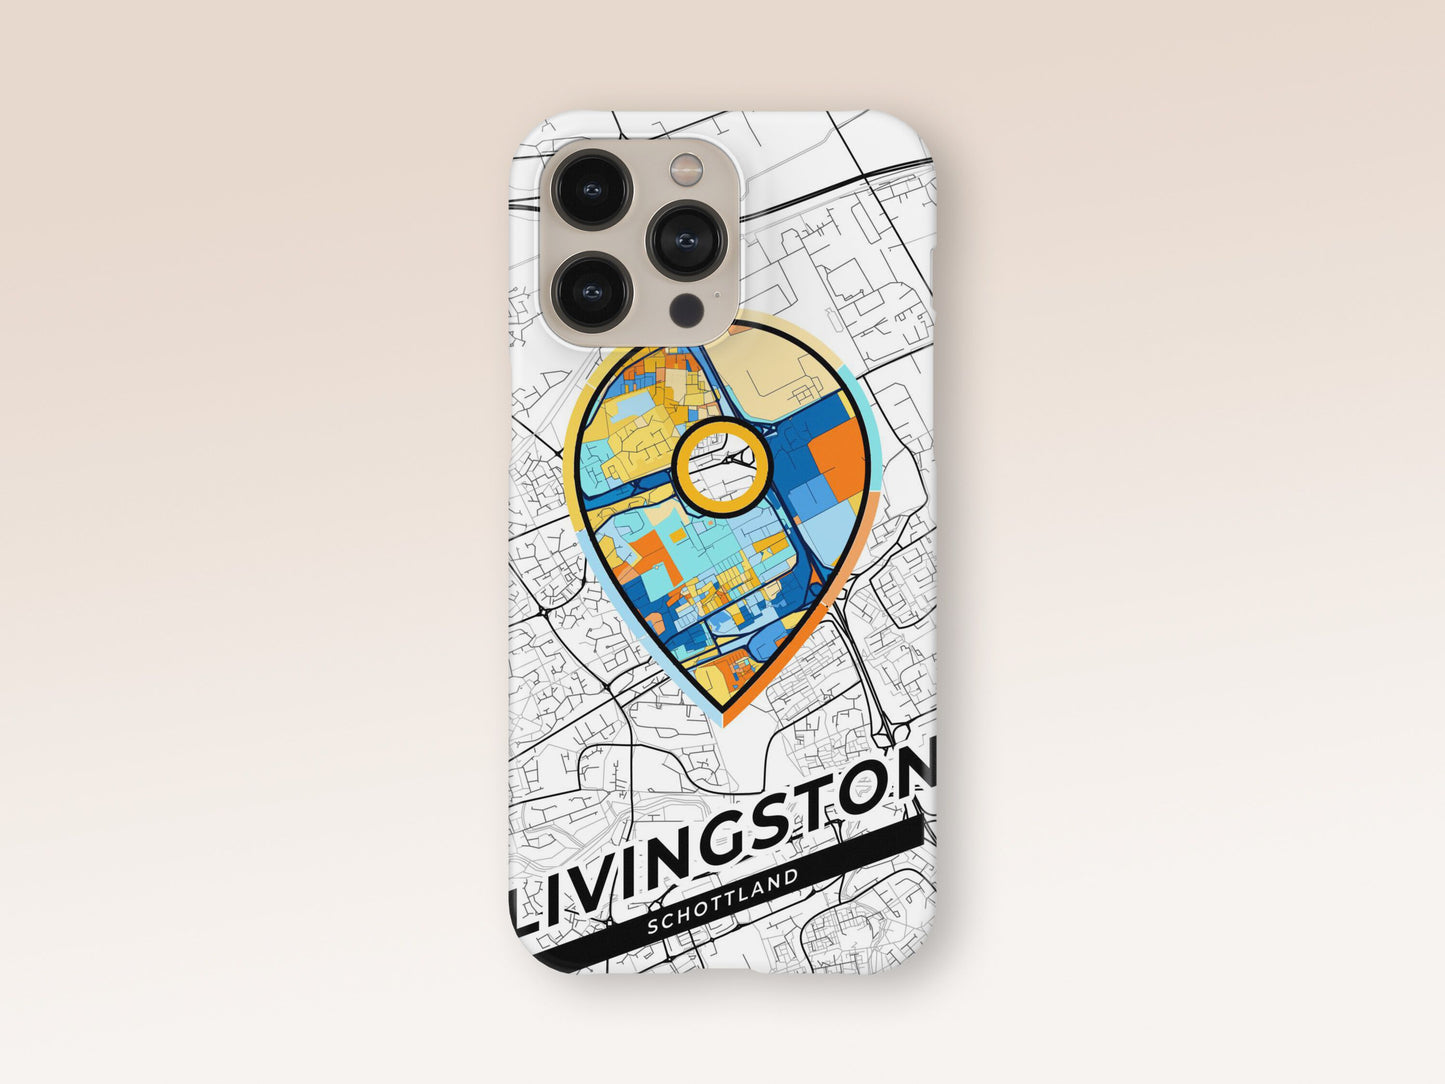 Livingston Scotland slim phone case with colorful icon. Birthday, wedding or housewarming gift. Couple match cases. 1